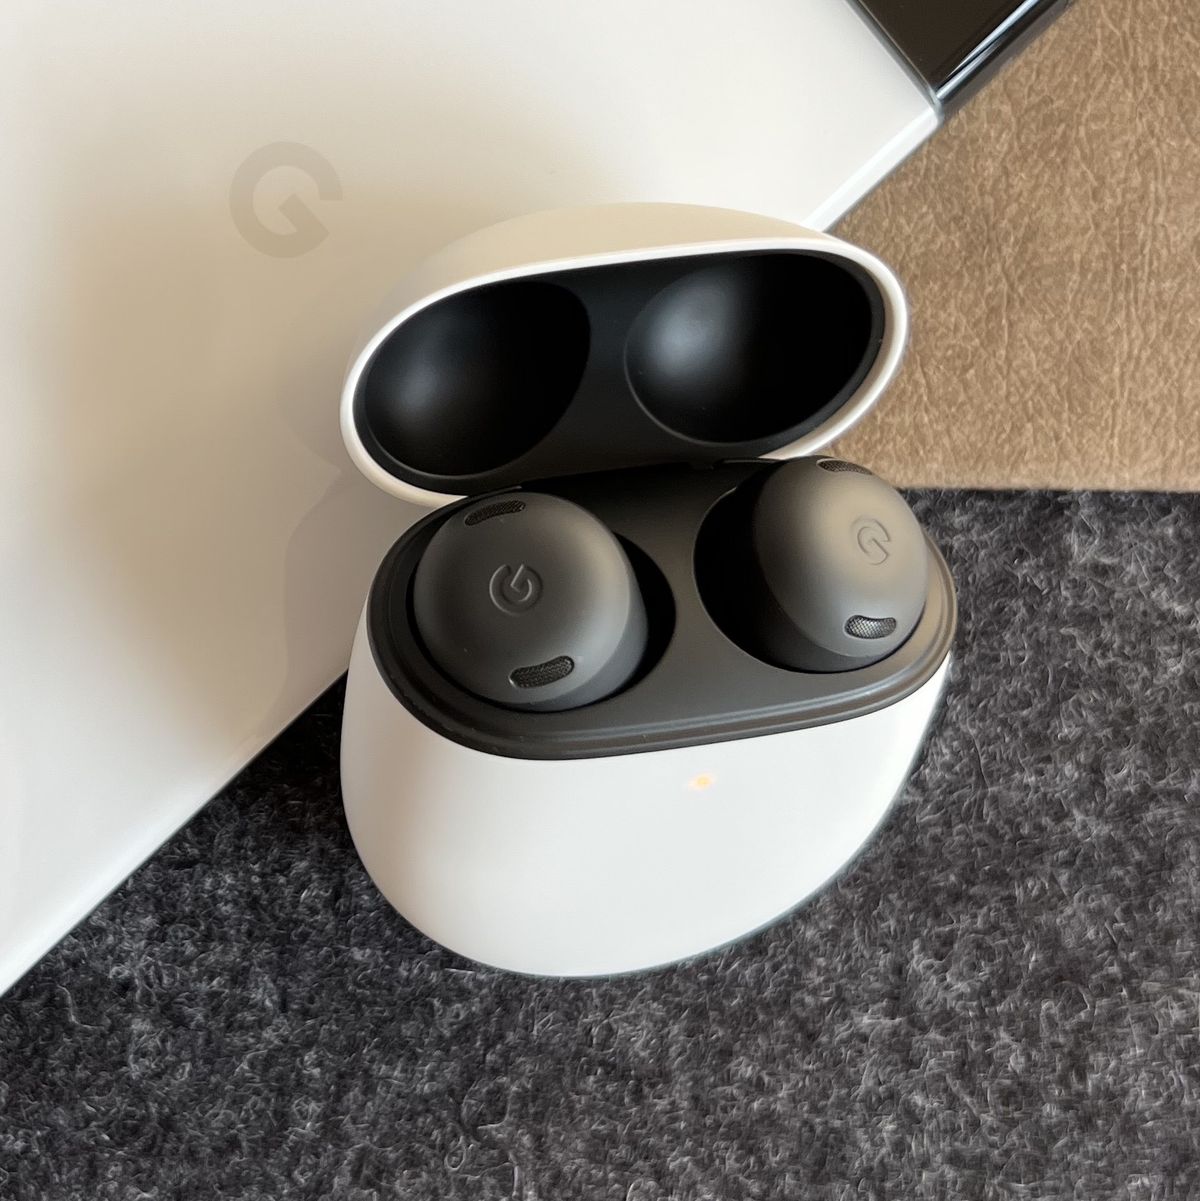 Google Pixel Buds Pro Review: The Best Wireless Earbuds for